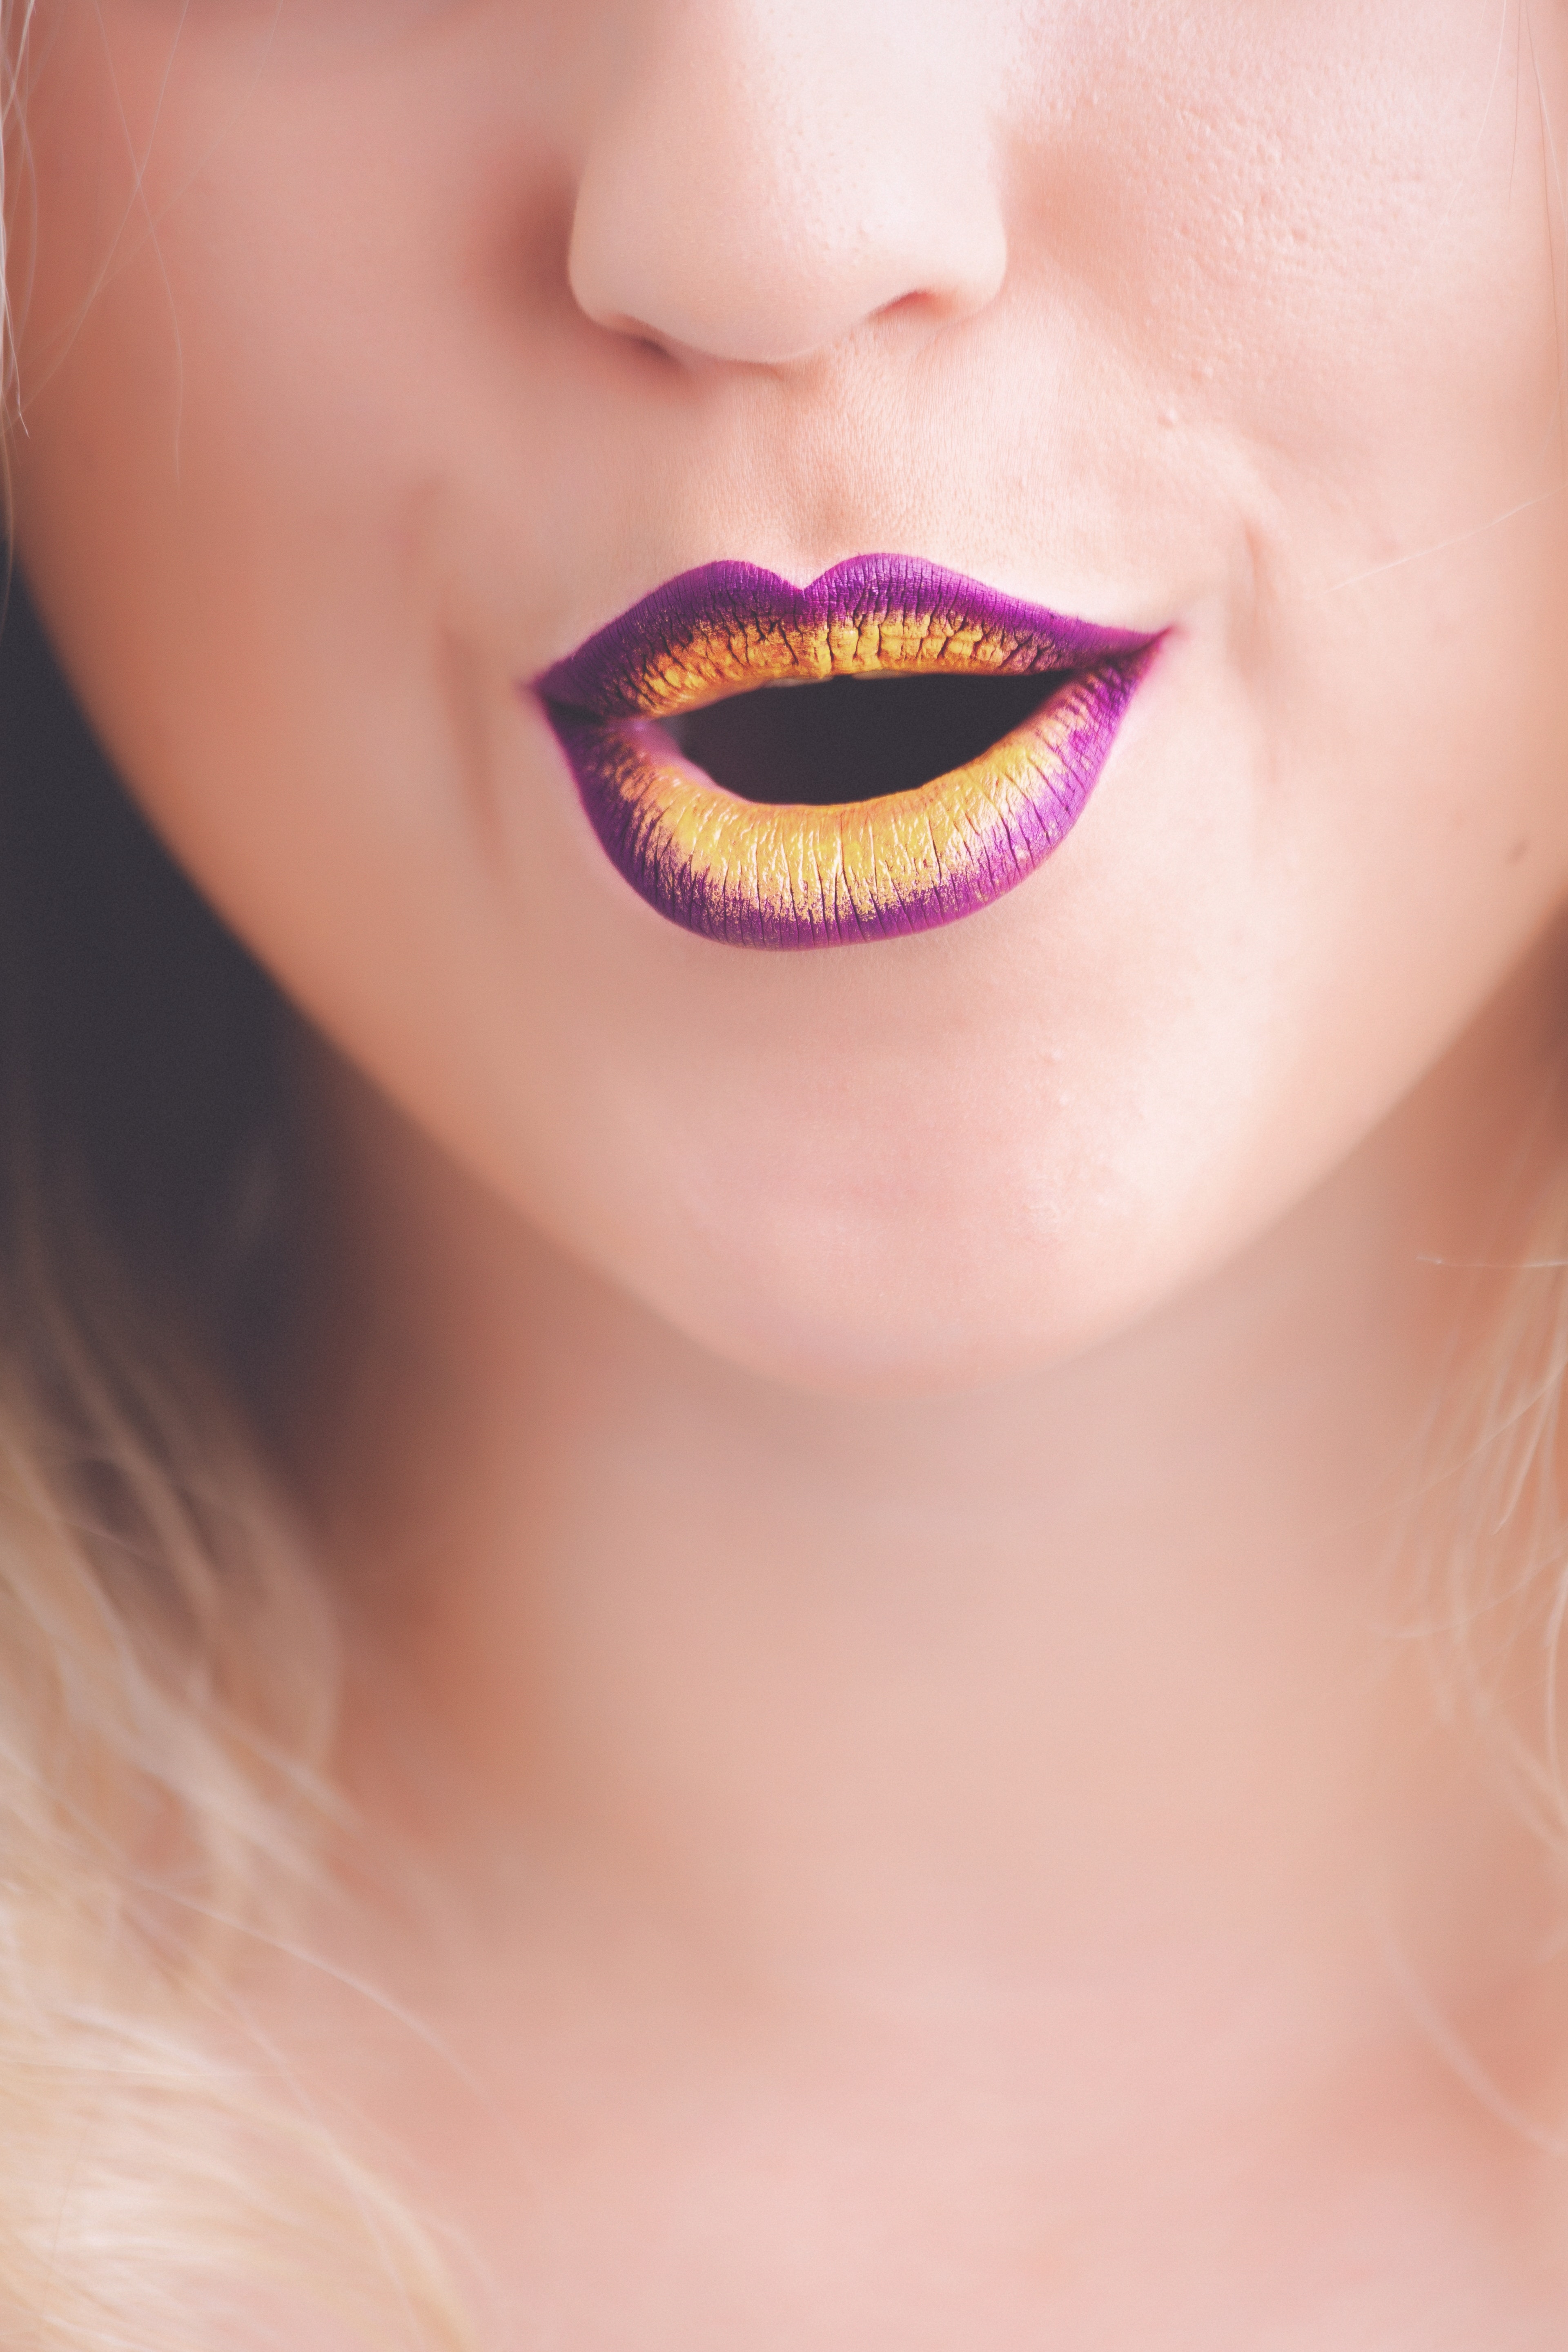 Woman with purple and yellow lipstick photo